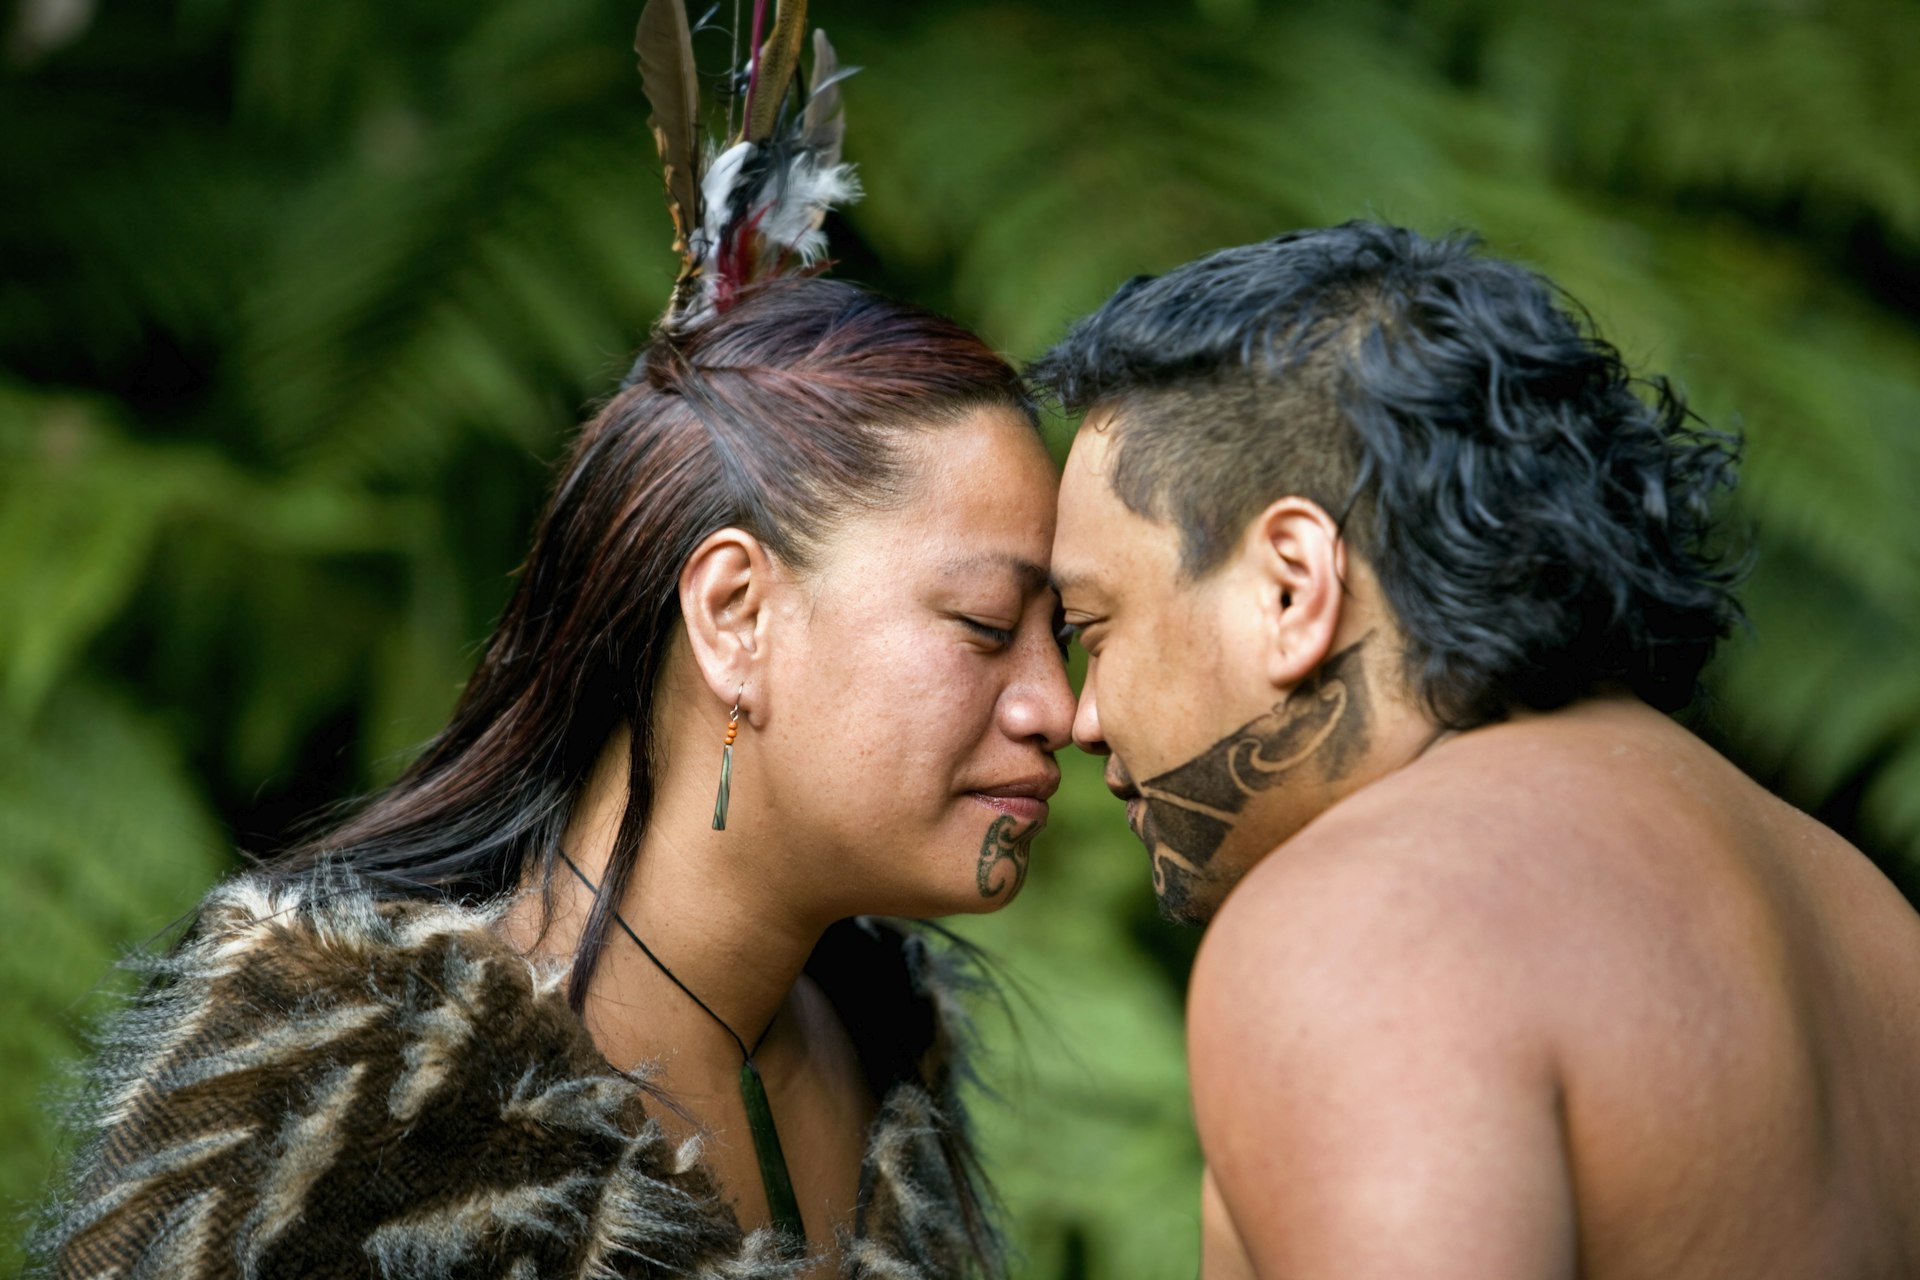 A couple touch heads during a Maori hongi greeting